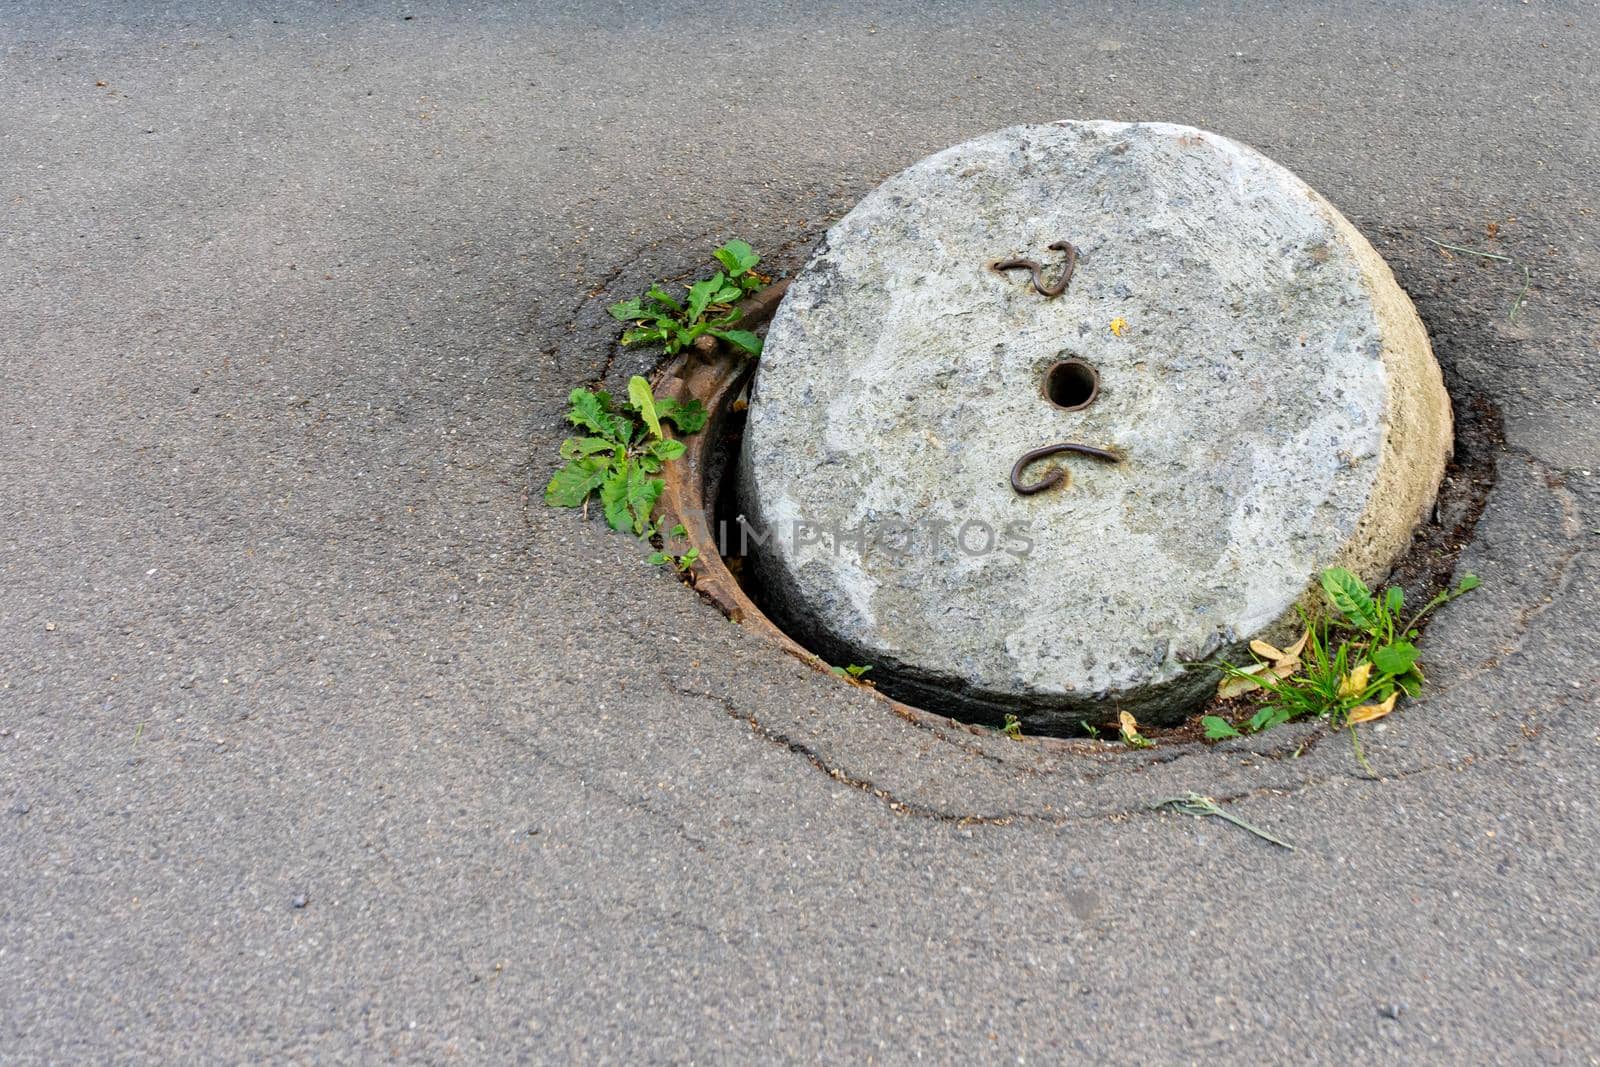 An old sewer manhole with an open concrete cover by Serhii_Voroshchuk